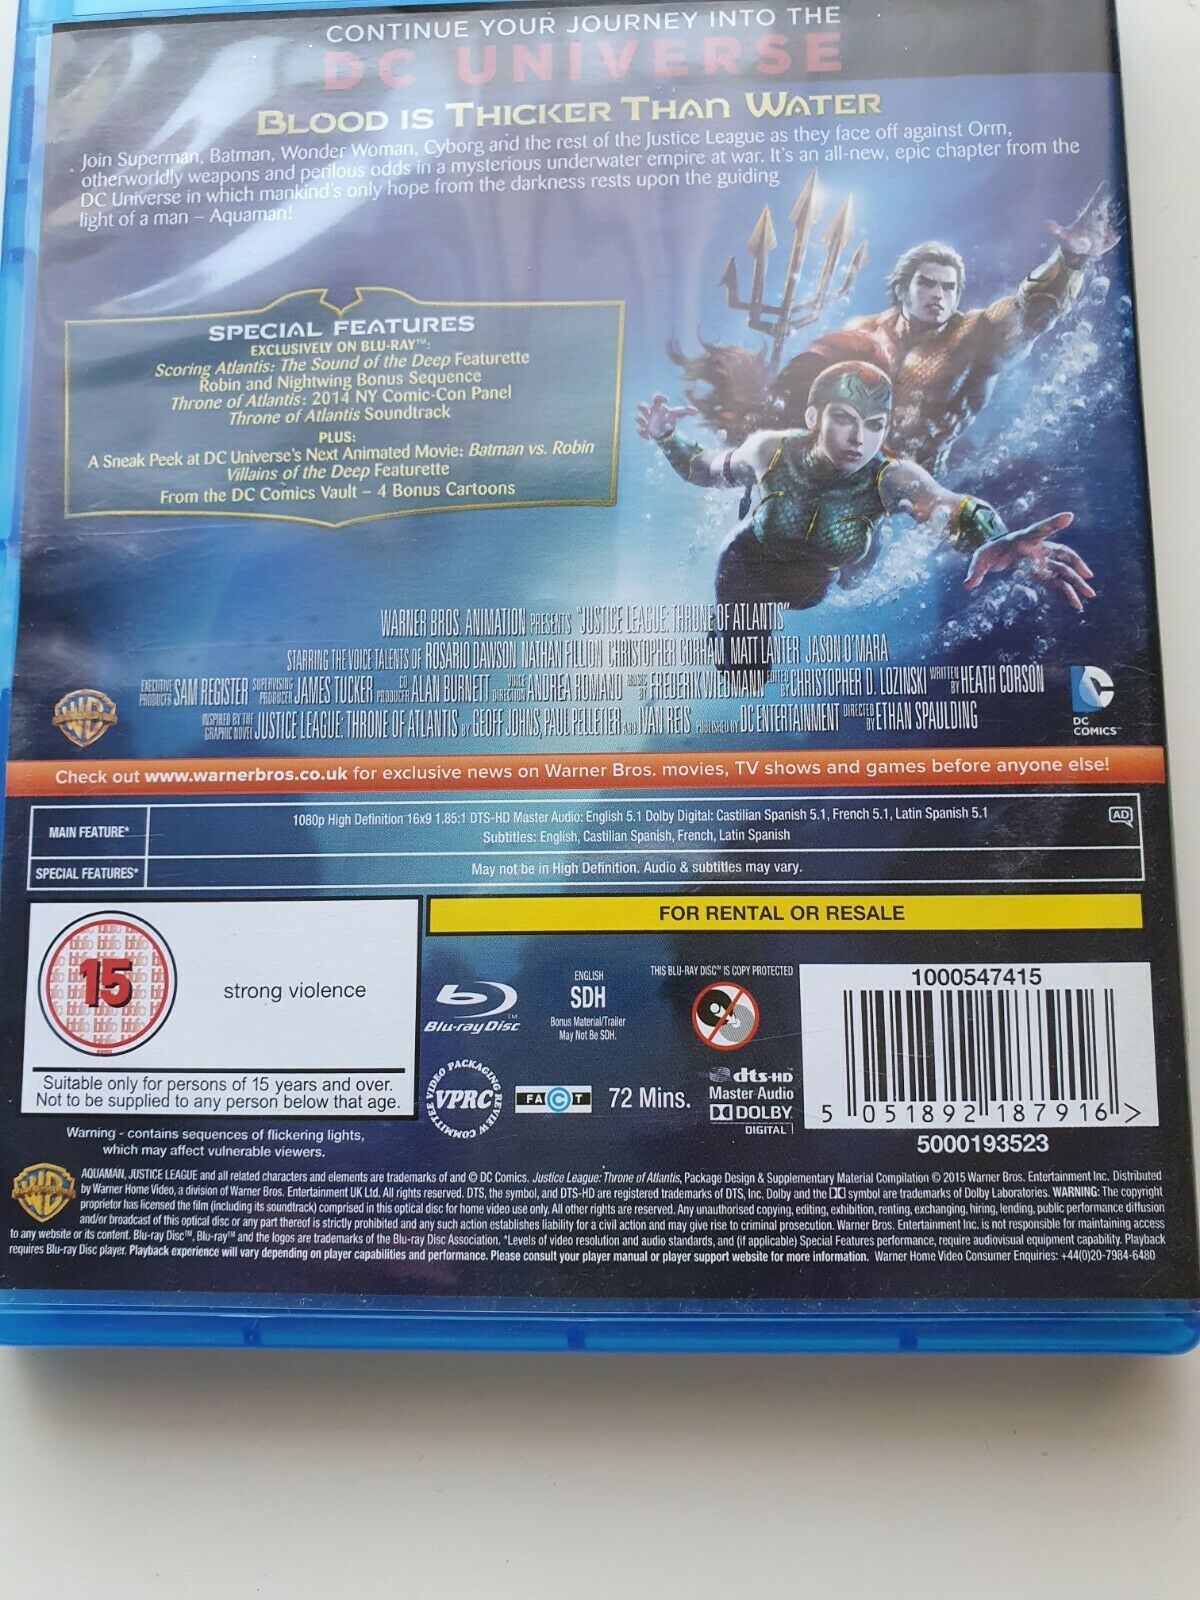 5051892187916 Justice League: Throne of Atlantis Blu-Ray (2015) Ethan Spaulding NEW SEALED